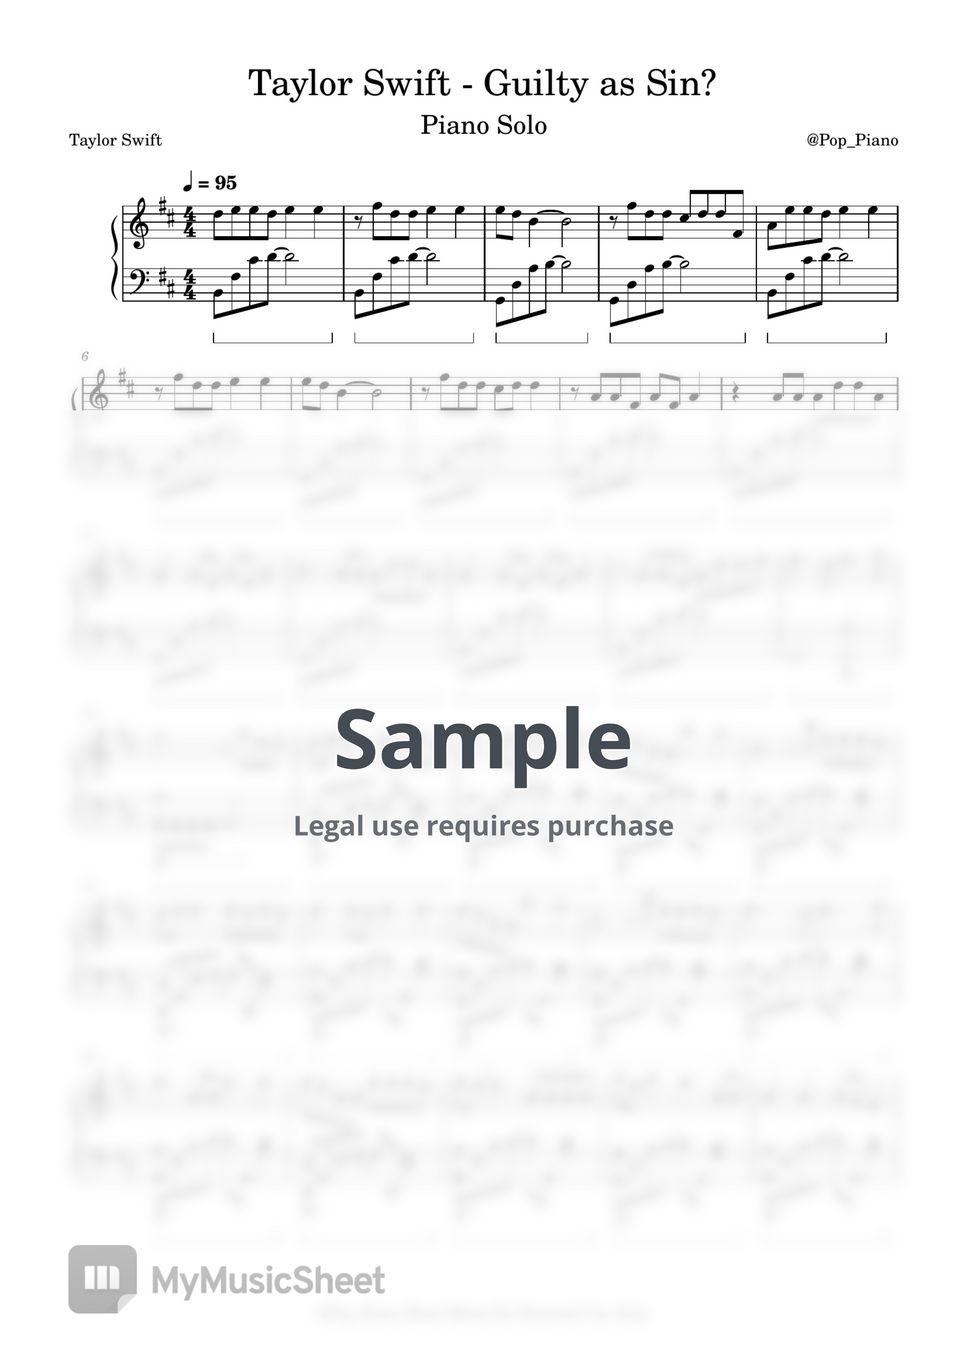 Taylor Swift - Guilty as Sin? Sheets by Pop Piano